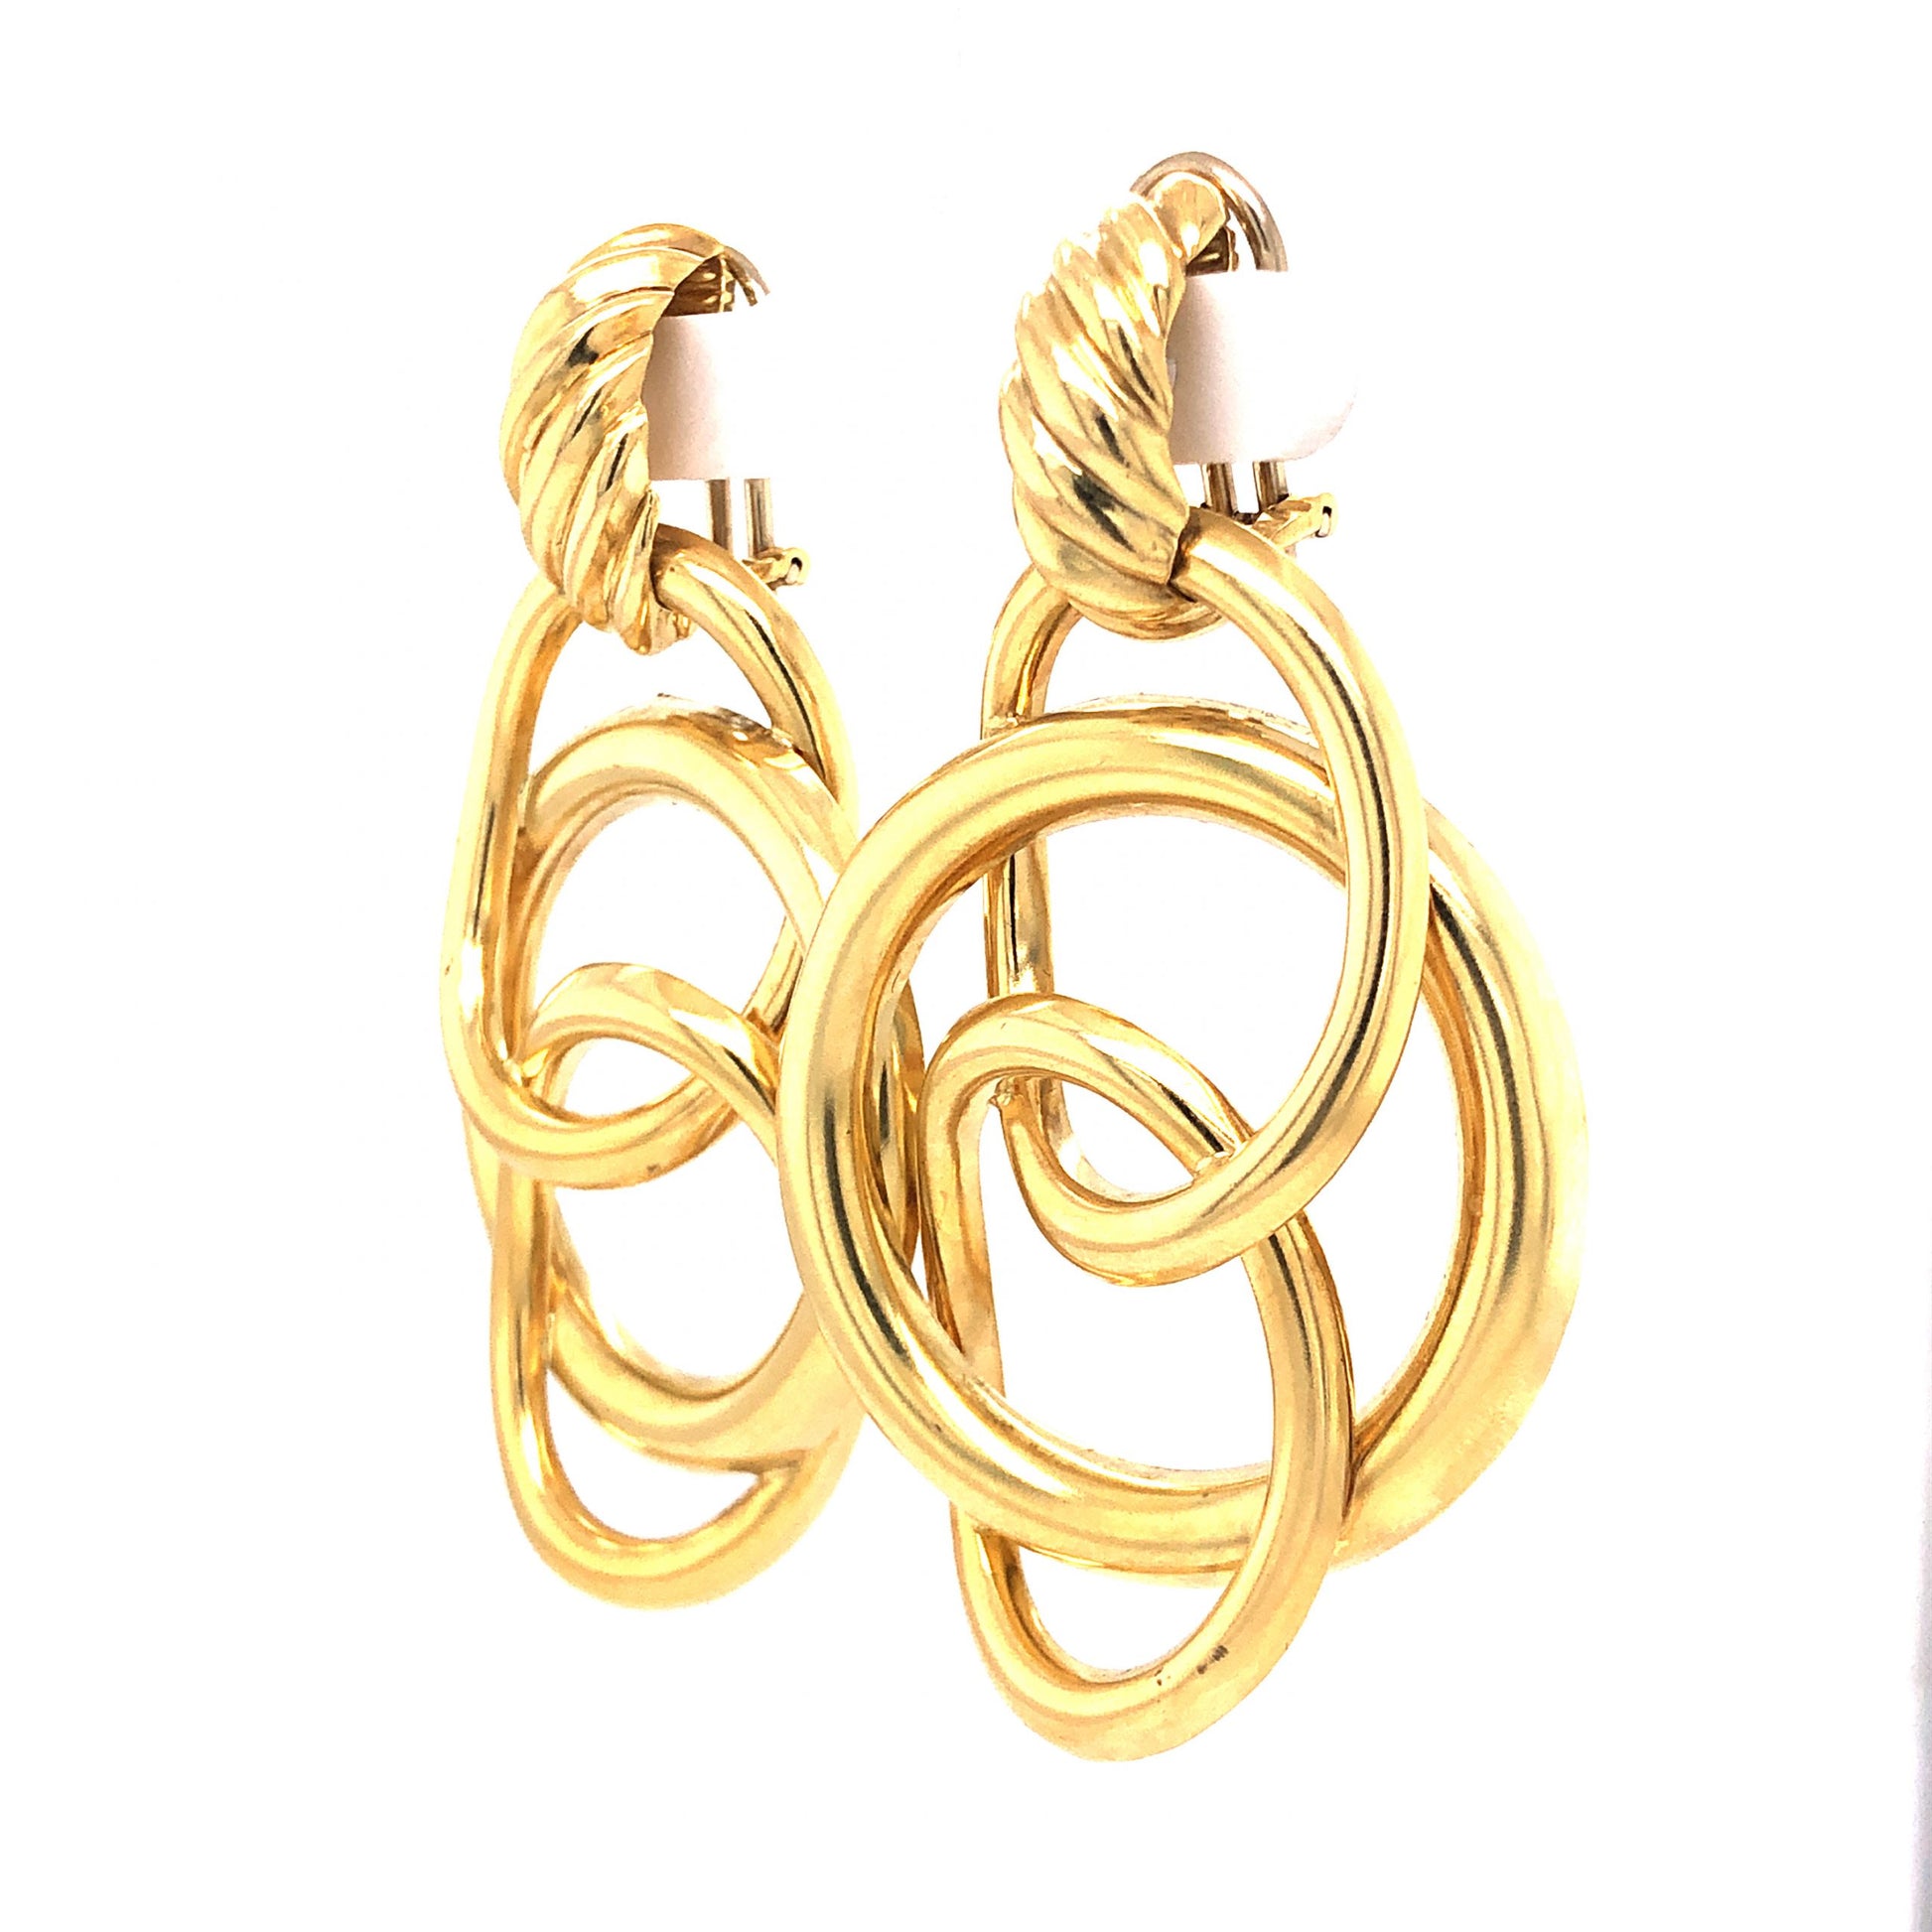 Interlaced Hoop Earrings in 18k Yellow GoldComposition: 18 Karat Yellow GoldTotal Gram Weight: 24.1 gInscription: 18k 31DAL 750 ITALY